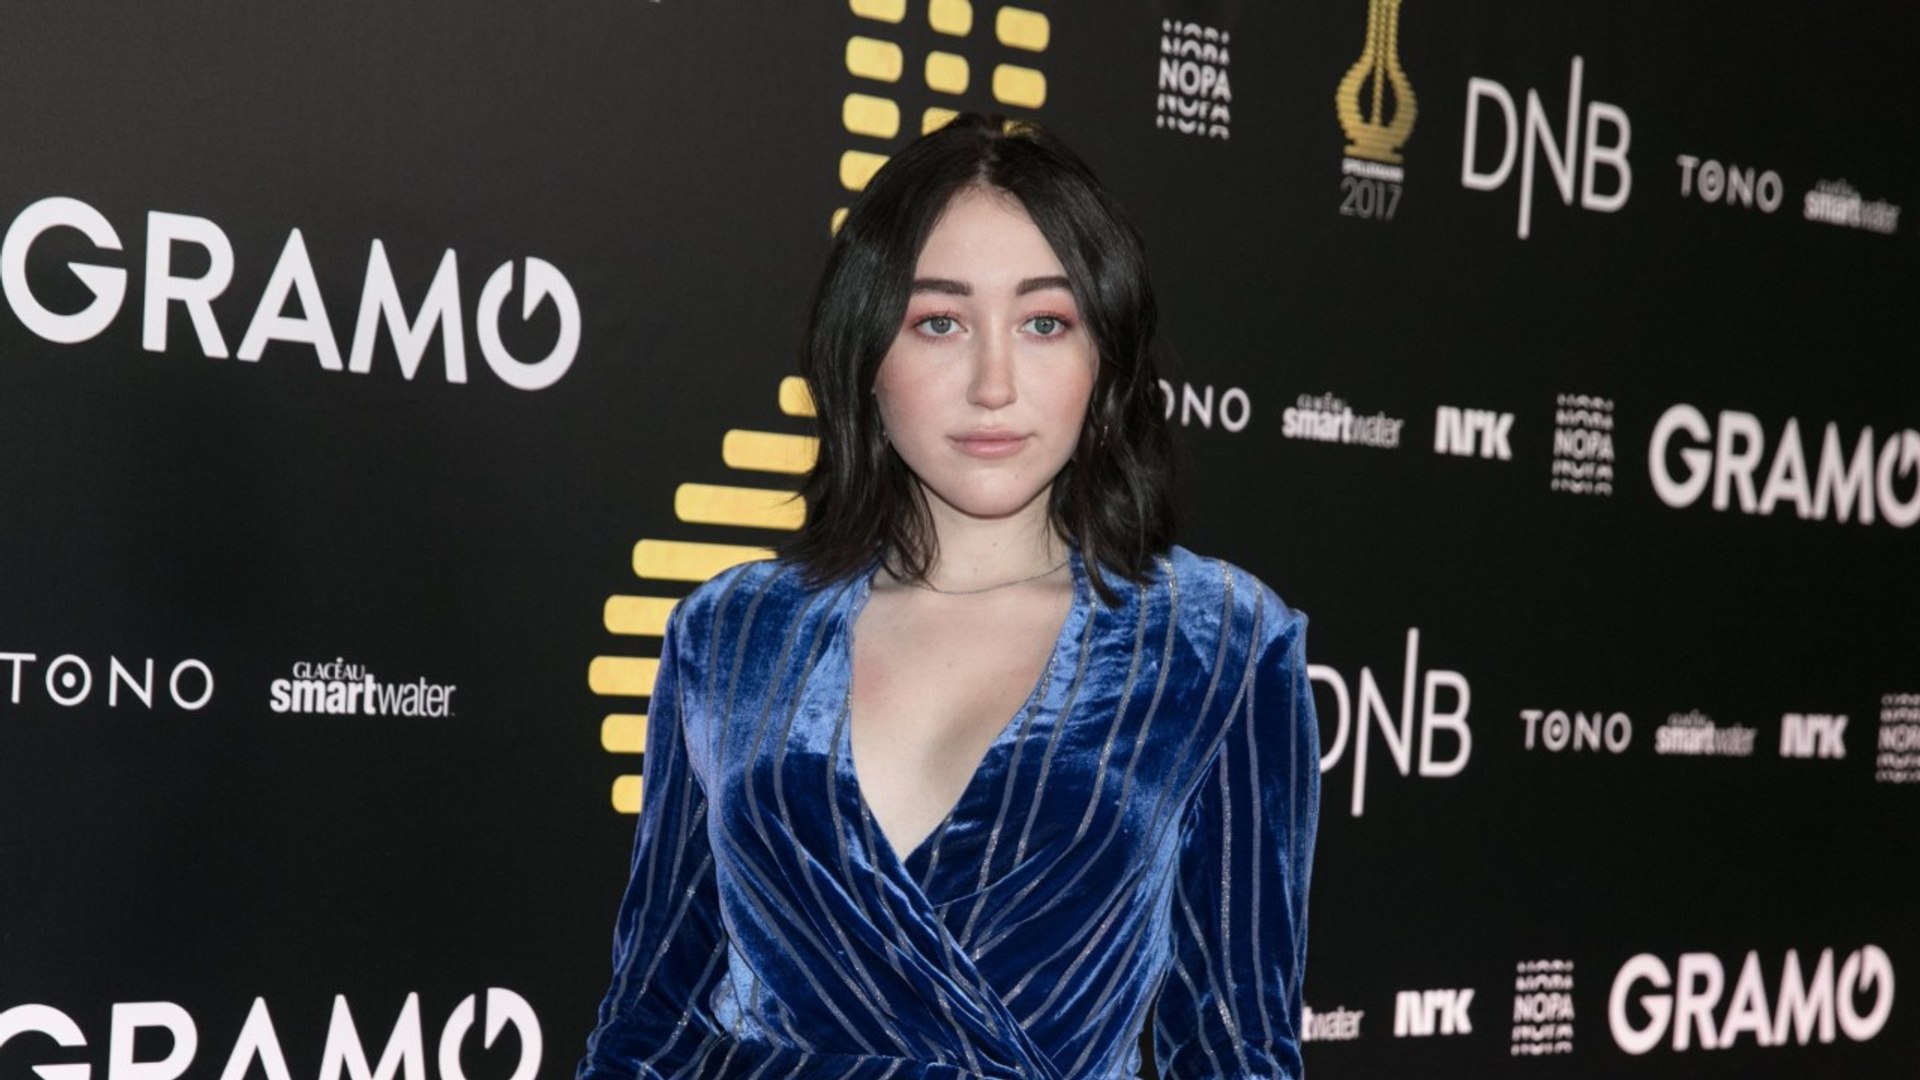 Noah Cyrus To Launch Her First Music Tour In September